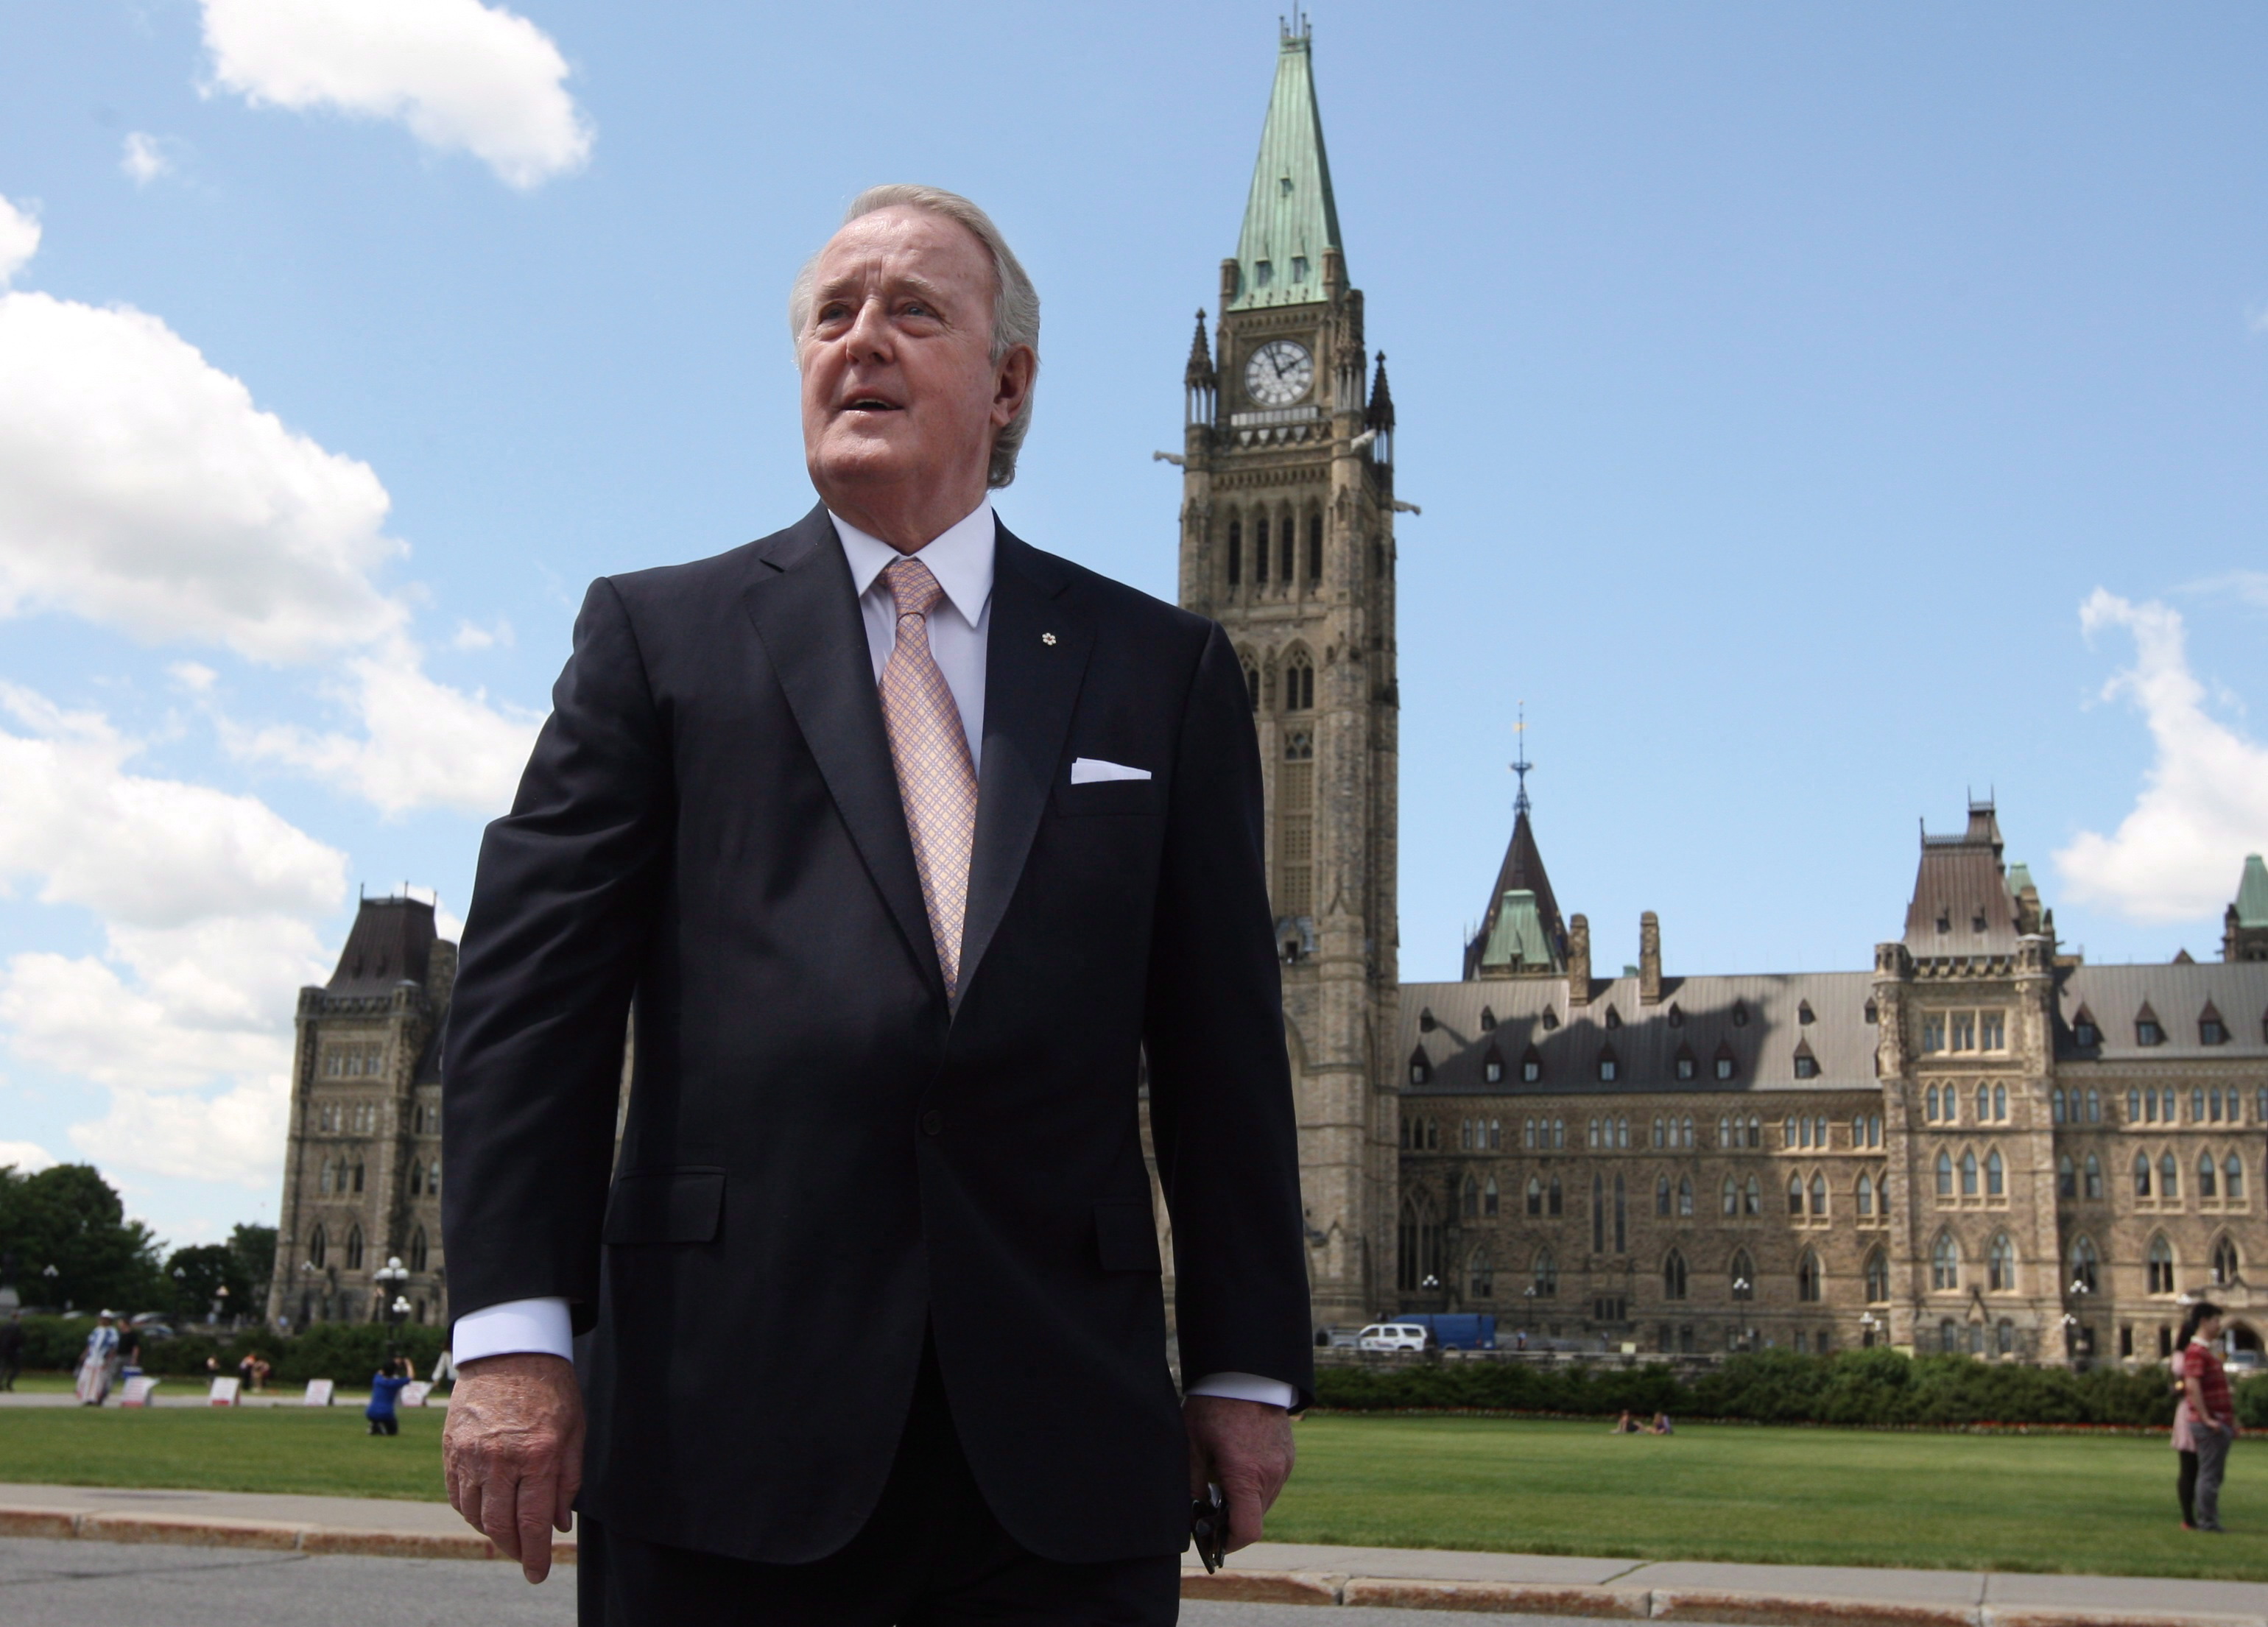 As Brian Mulroney’s state funeral nears, here’s what to expect this week